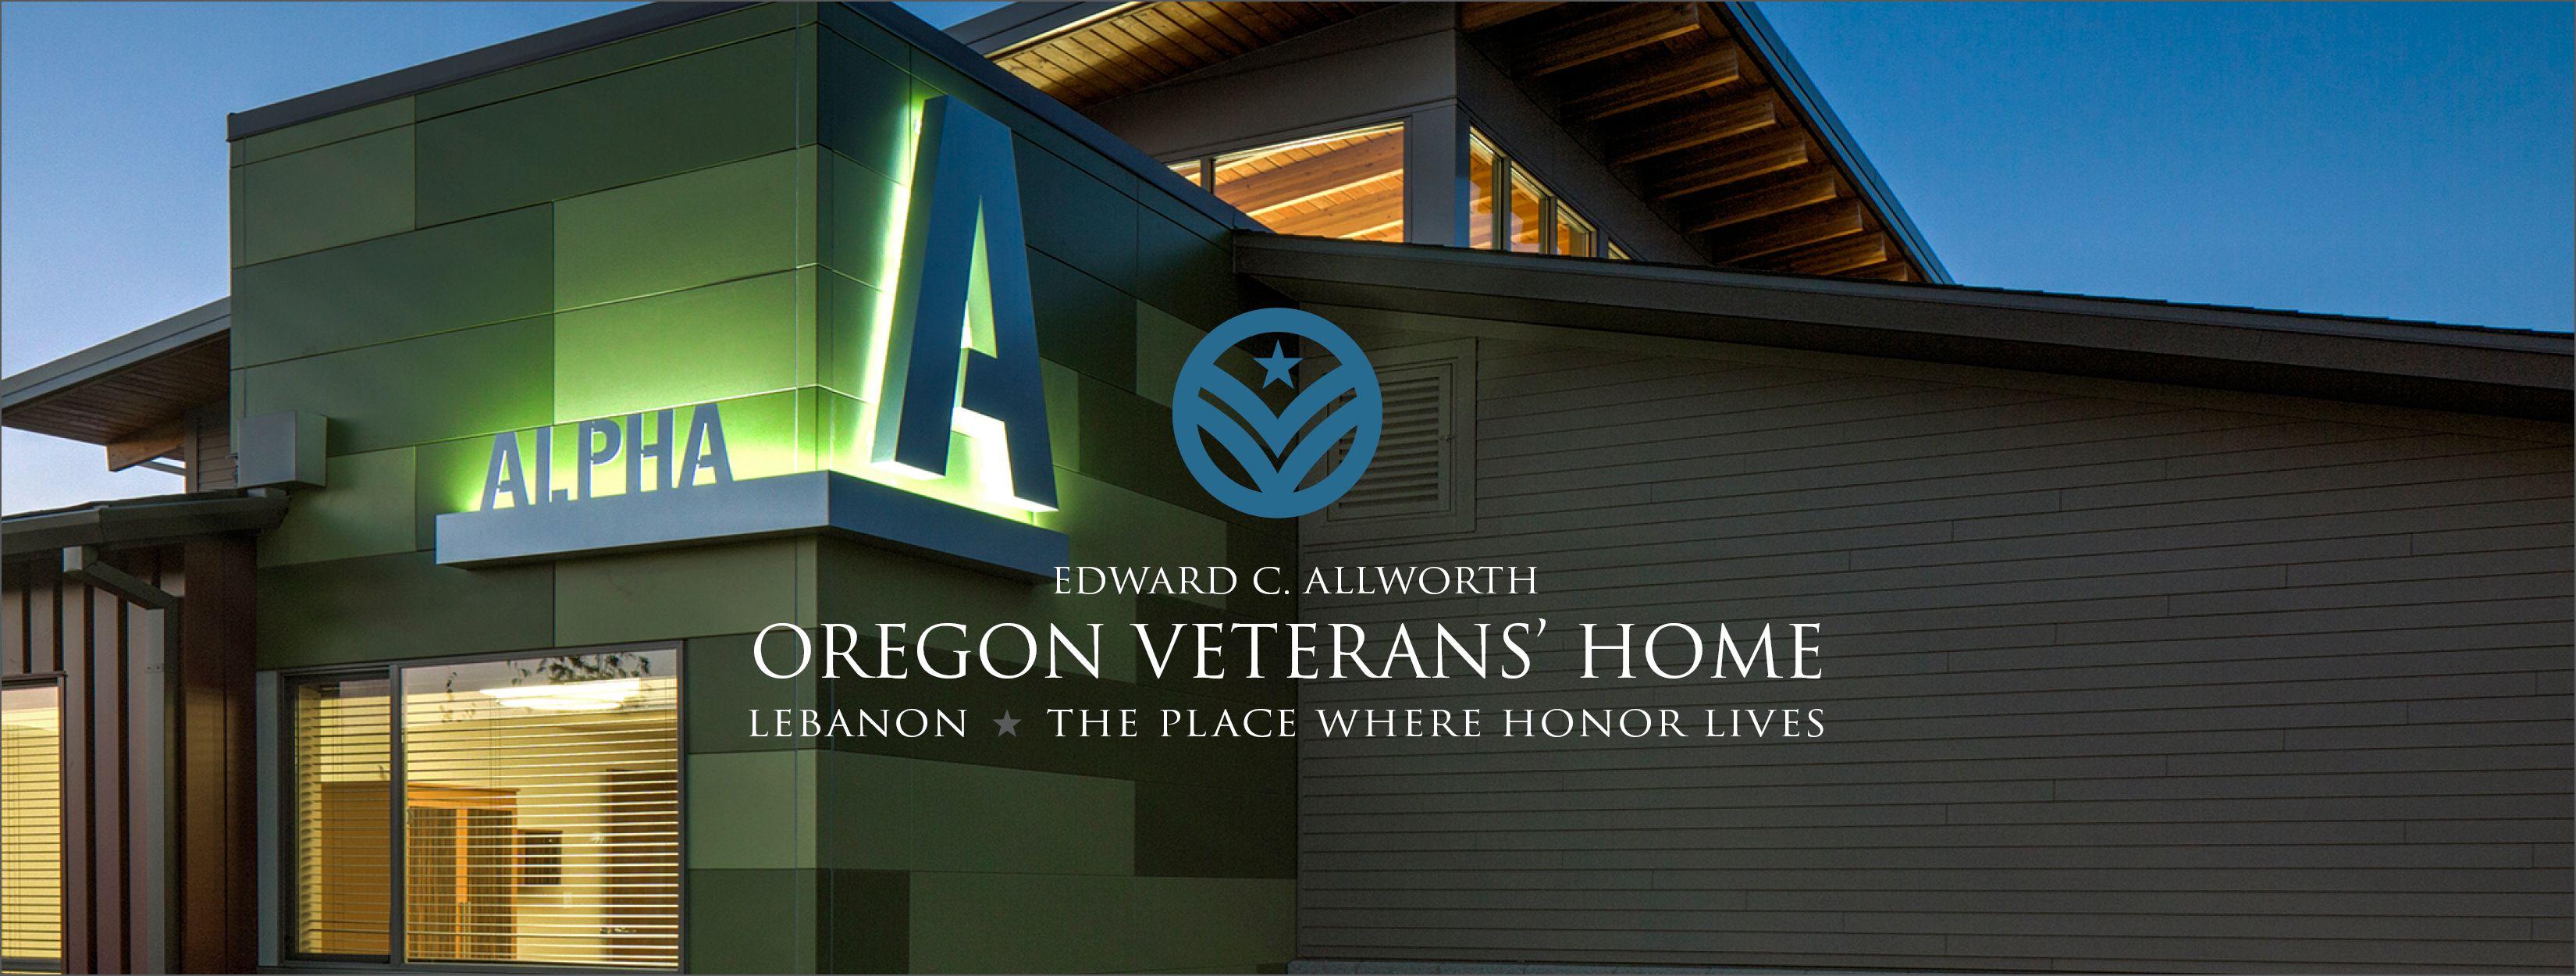 Oregon.gov Logo - Oregon Department of Veterans' Affairs : Welcome Page : OVH ...